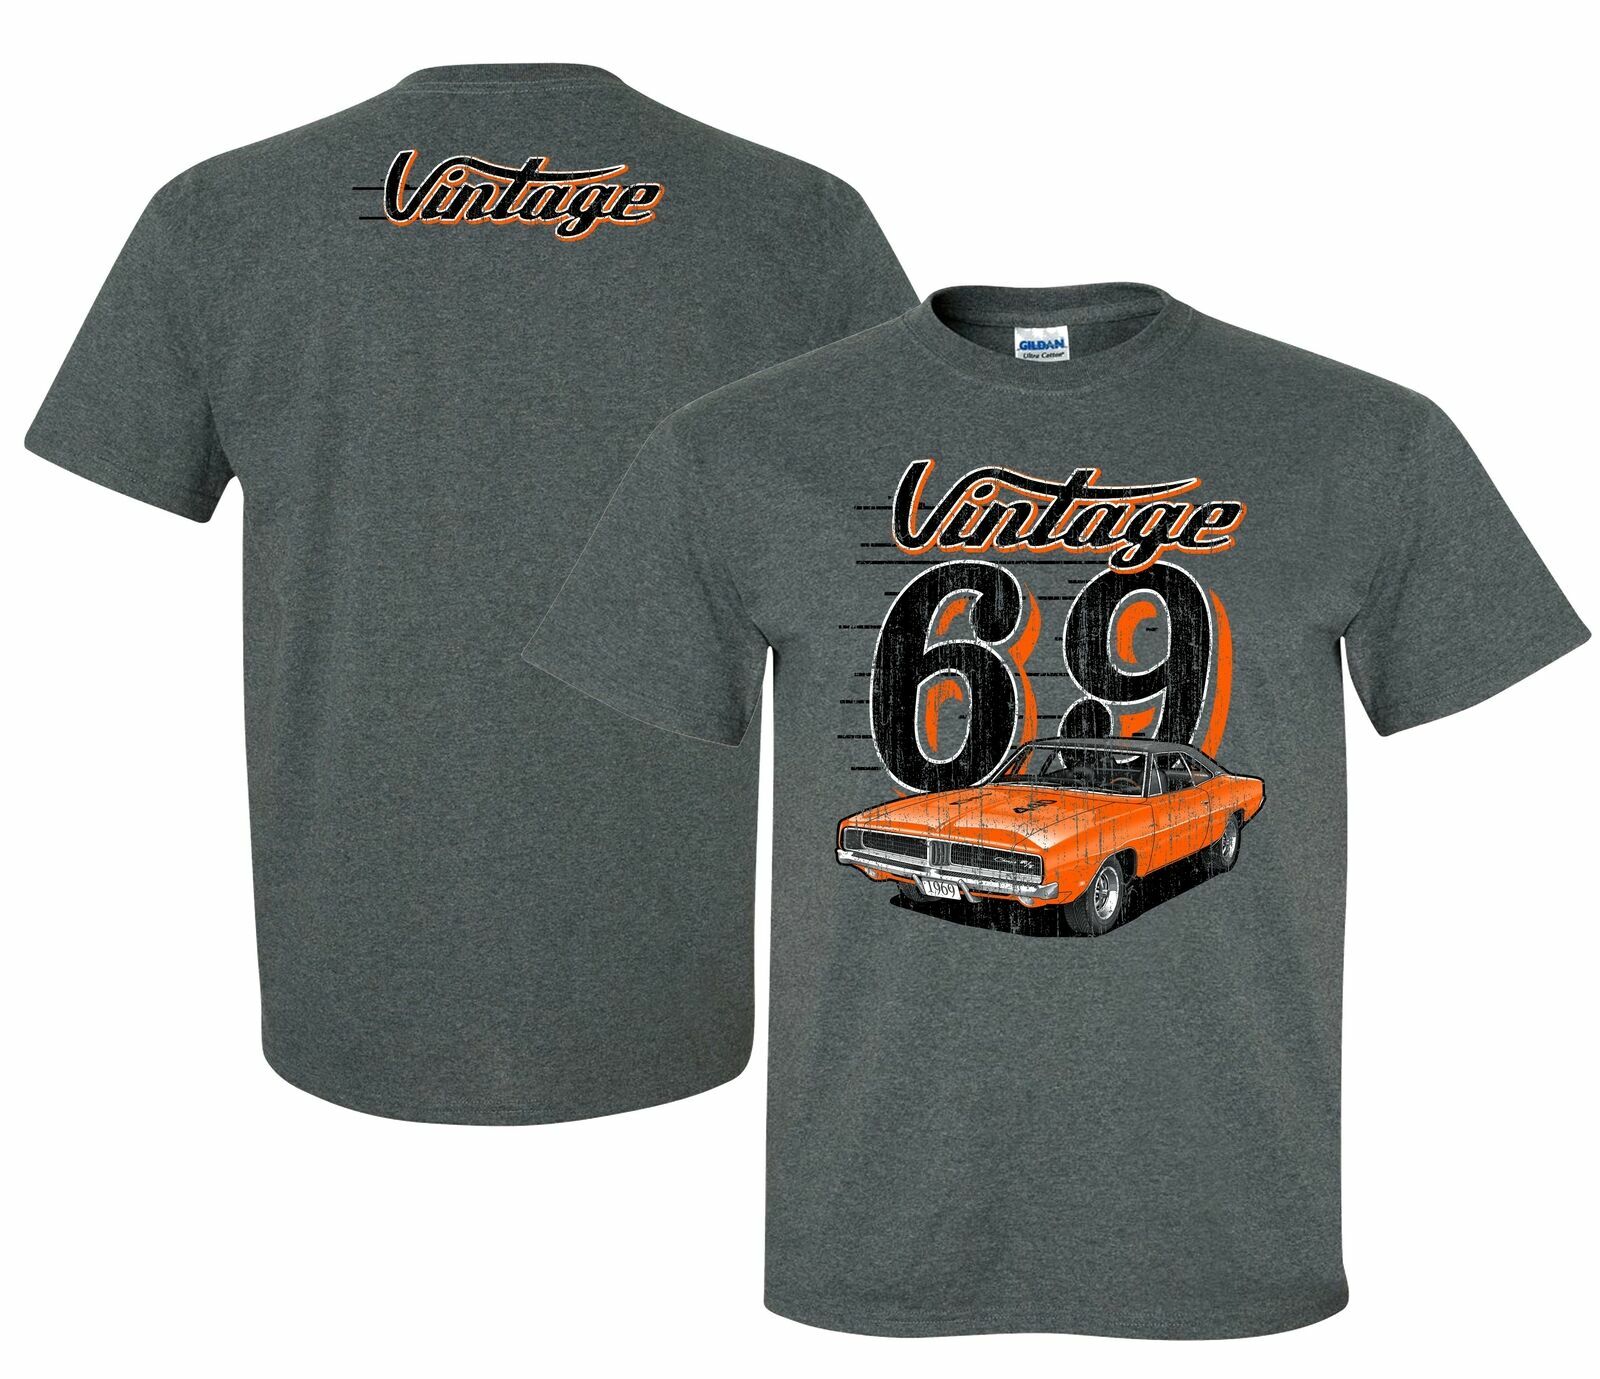 1969 Charger Valiant Dodge T Shirt Grey S M L Xl 2xl 3xl New With ...